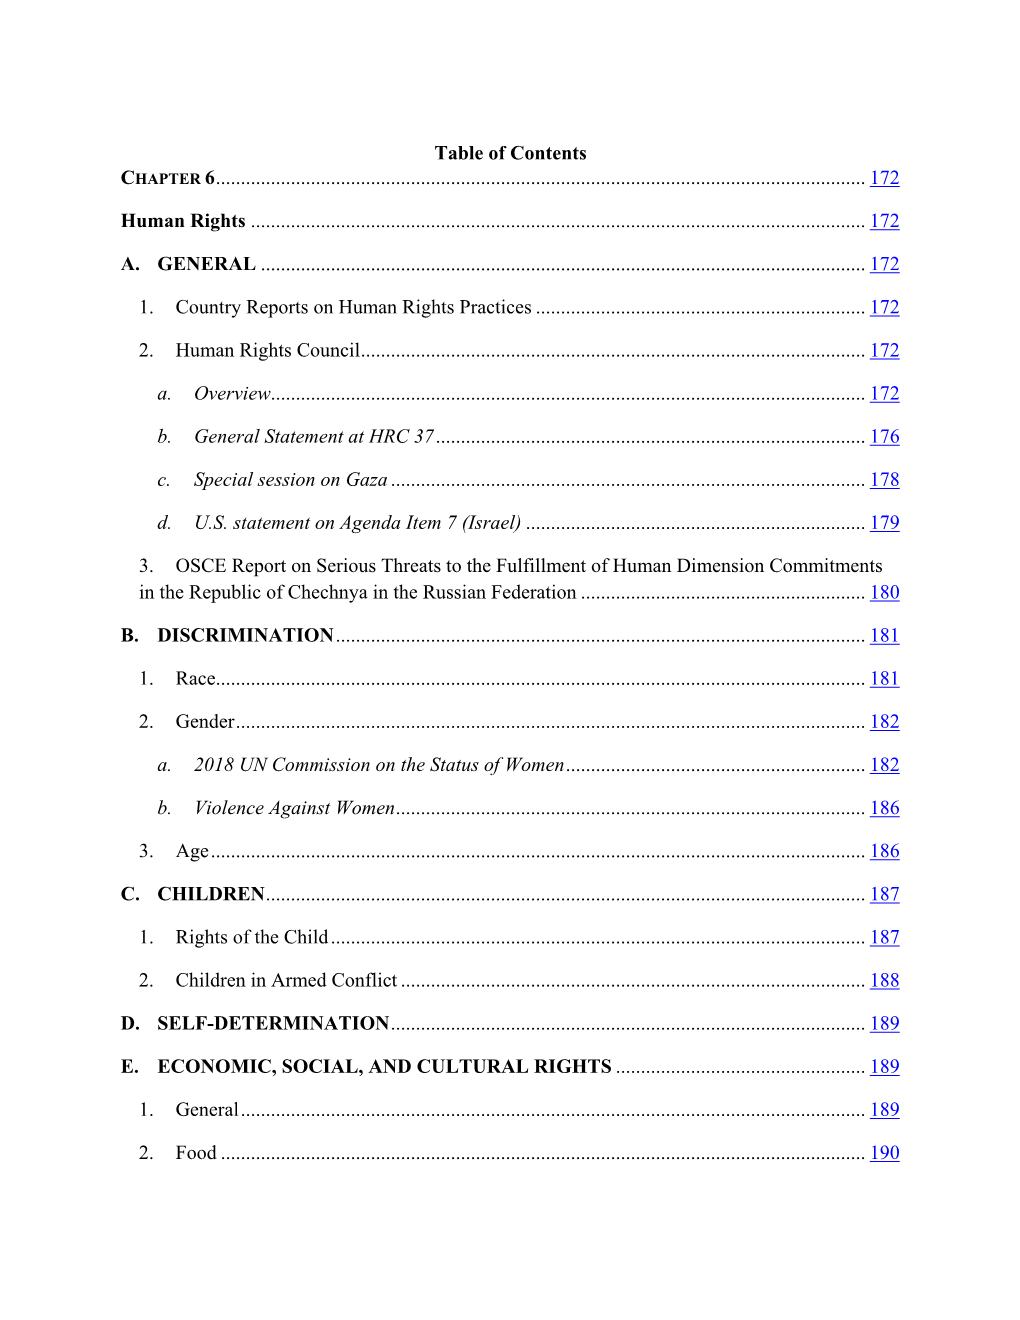 Table of Contents CHAPTER 6